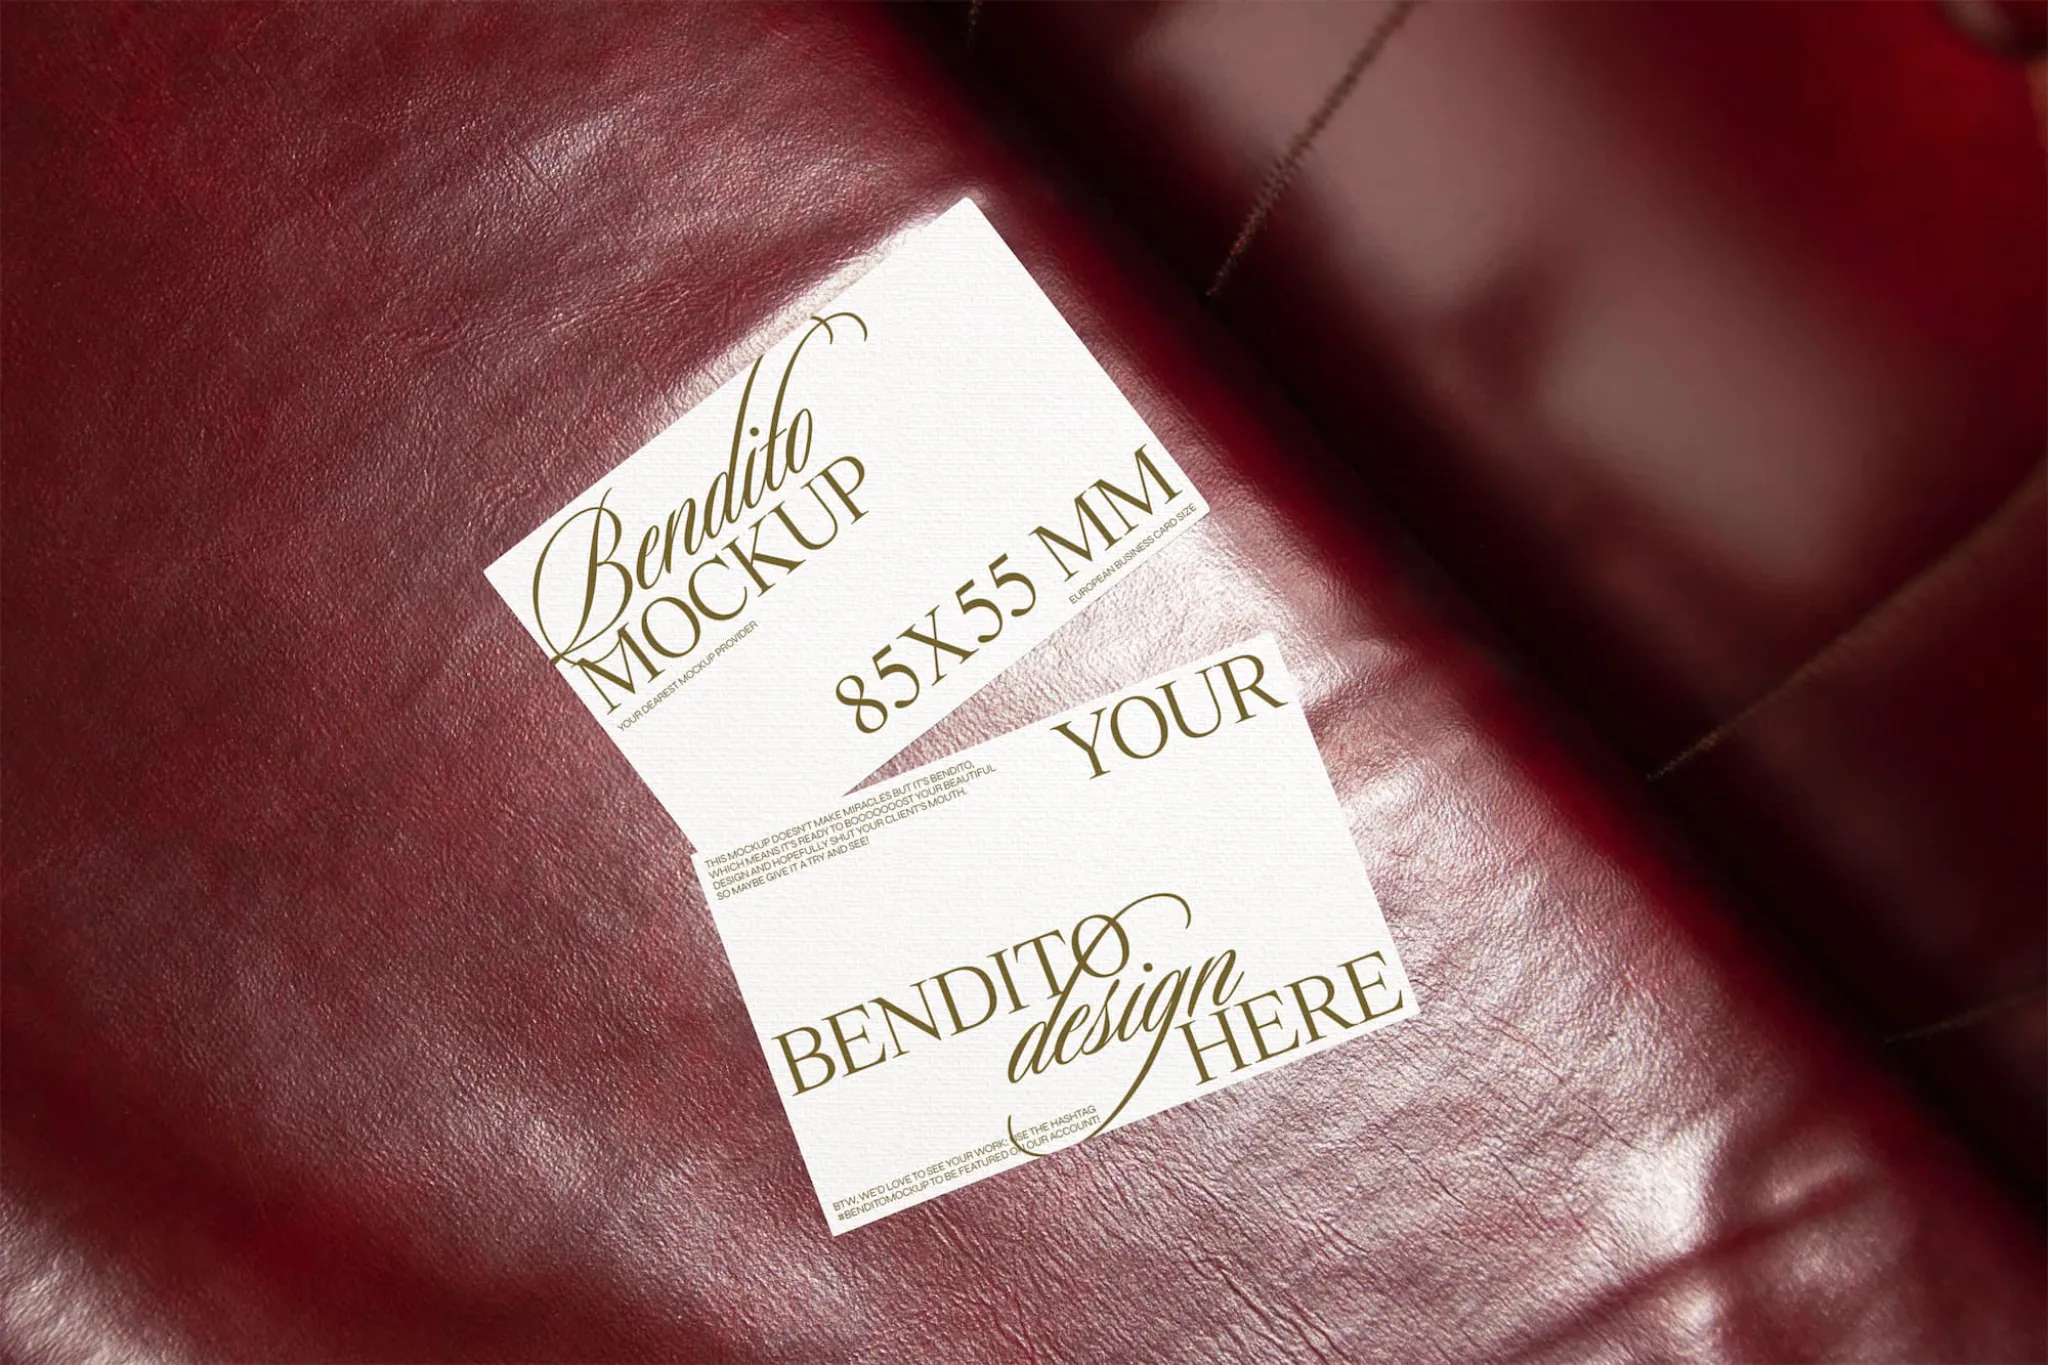 Front and back business card mockup on red leather couch with flash light.